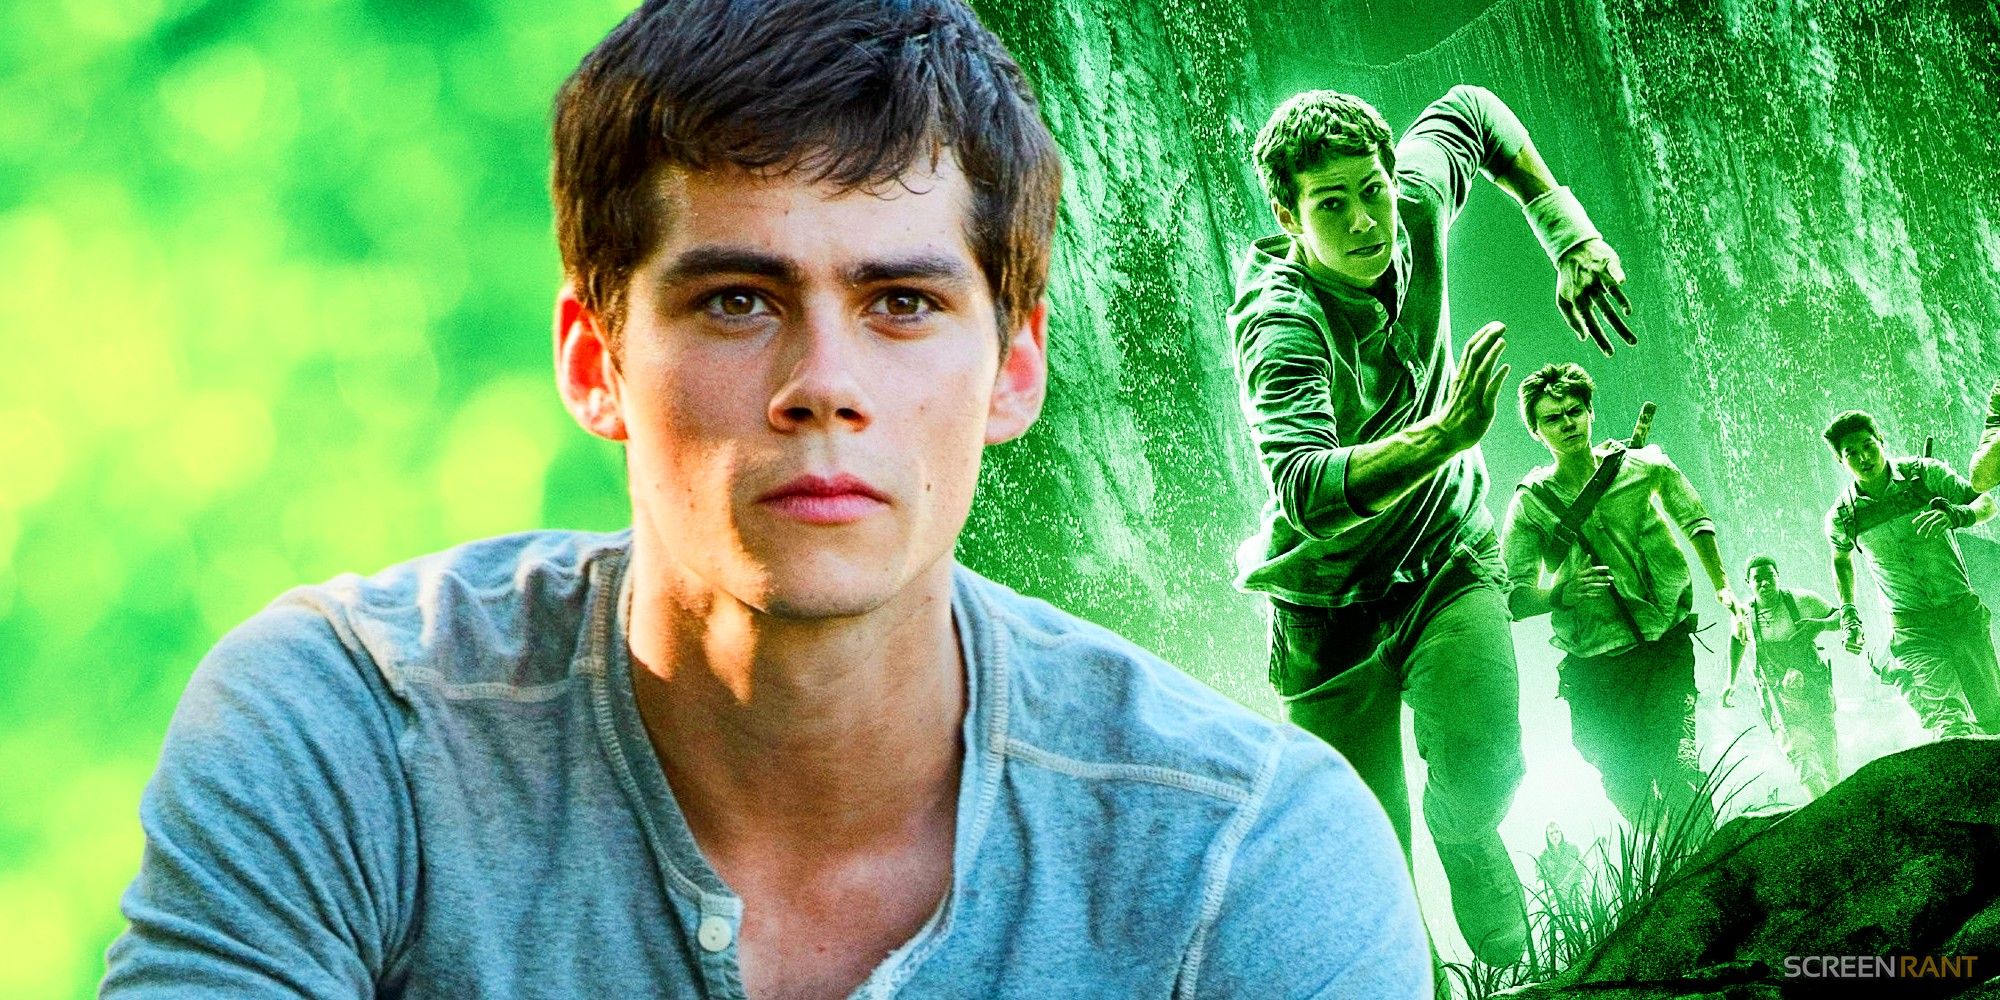 Maze Runner 4 Already Has An Easy Way To Bring Back Dylan O’Brien